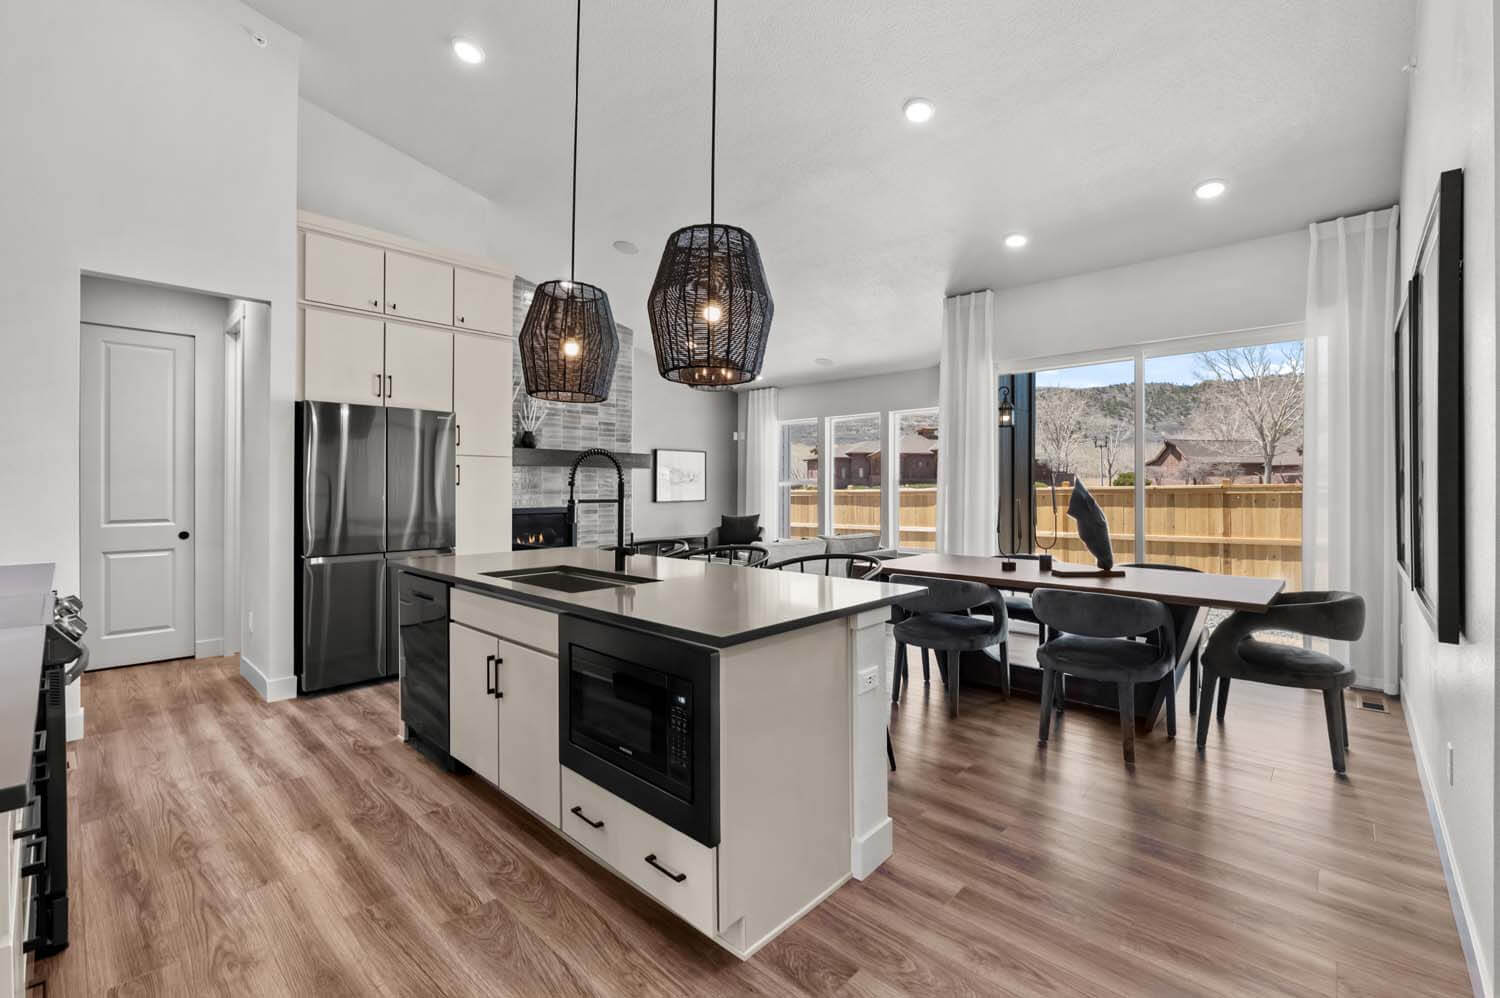 The open-concept floorplan has the kitchen, with its central island, looking to the dining area, which is adjacent to the great room with its vaulted ceiling. The space has white walls and hardwood floors.